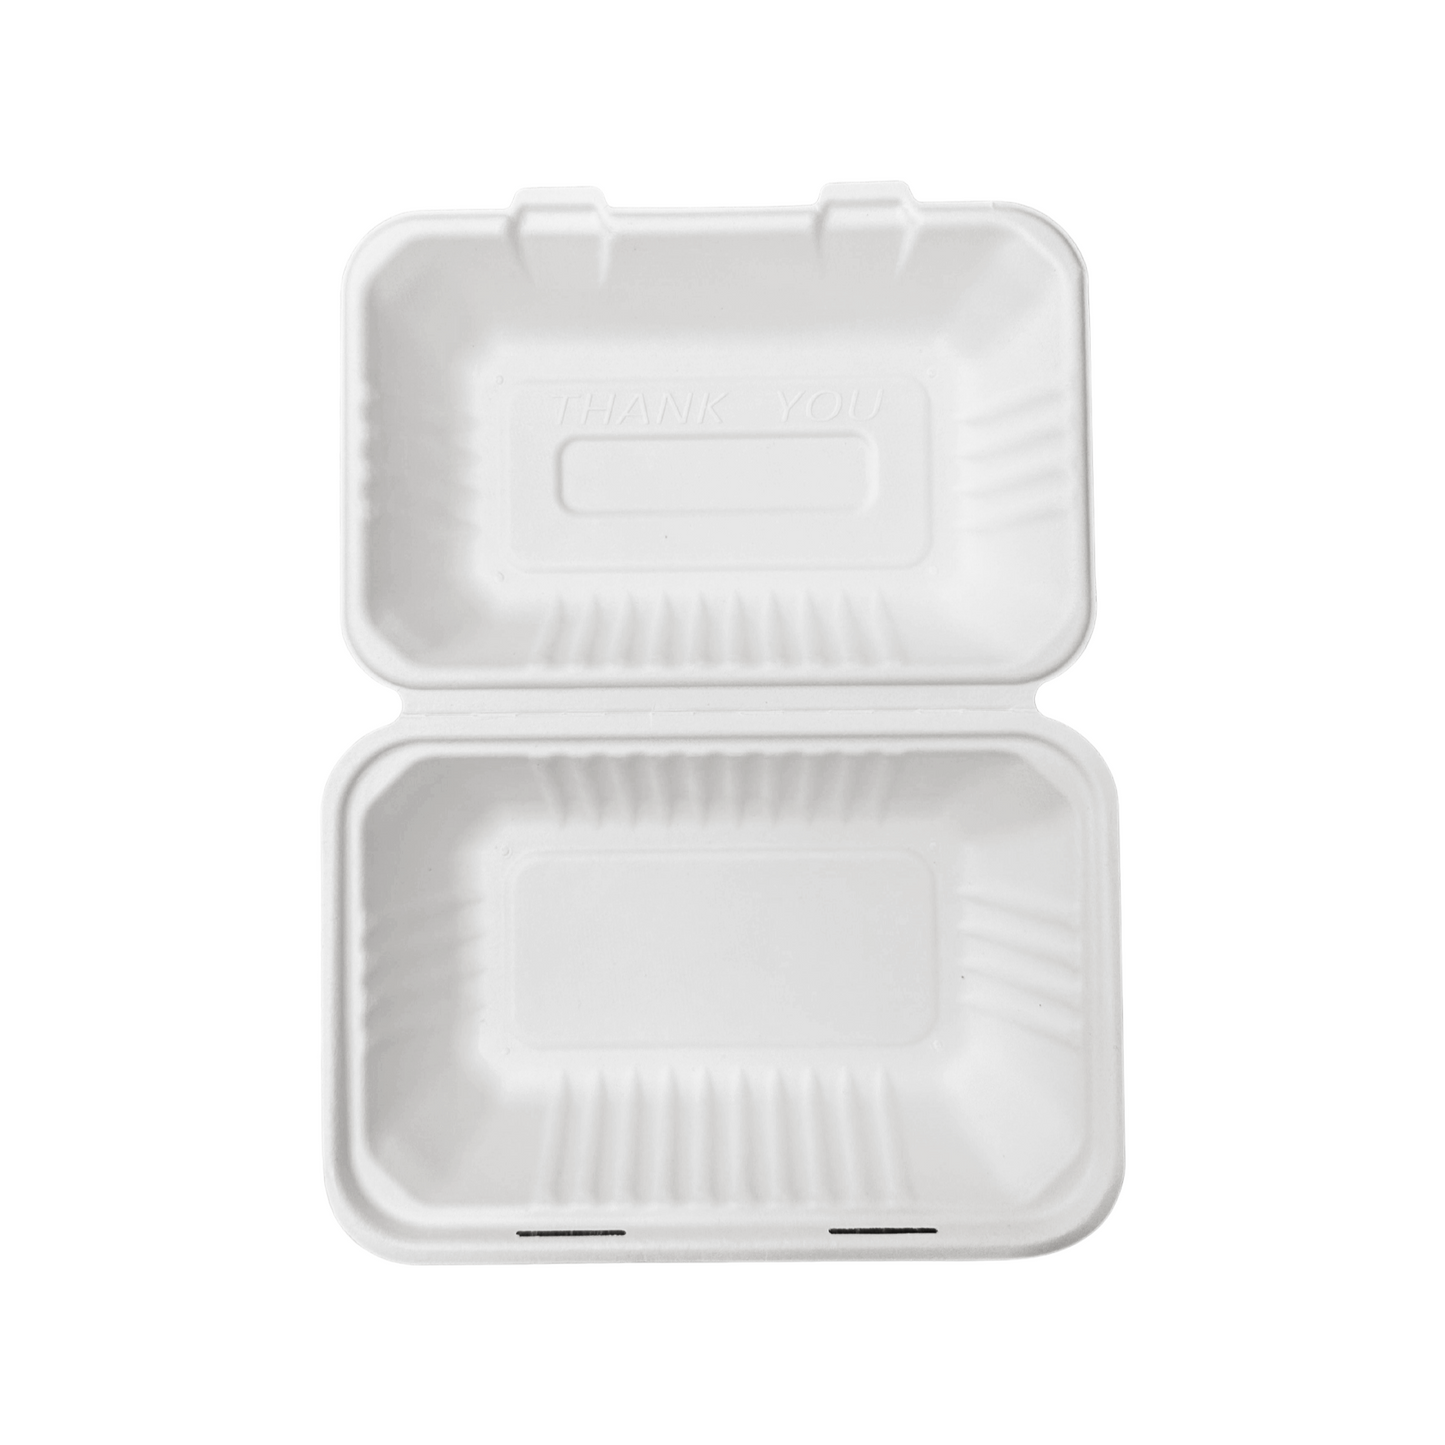 250 Pcs, 9x6x3'', 1-Compartment, Sugarcane Clamshell Food Container